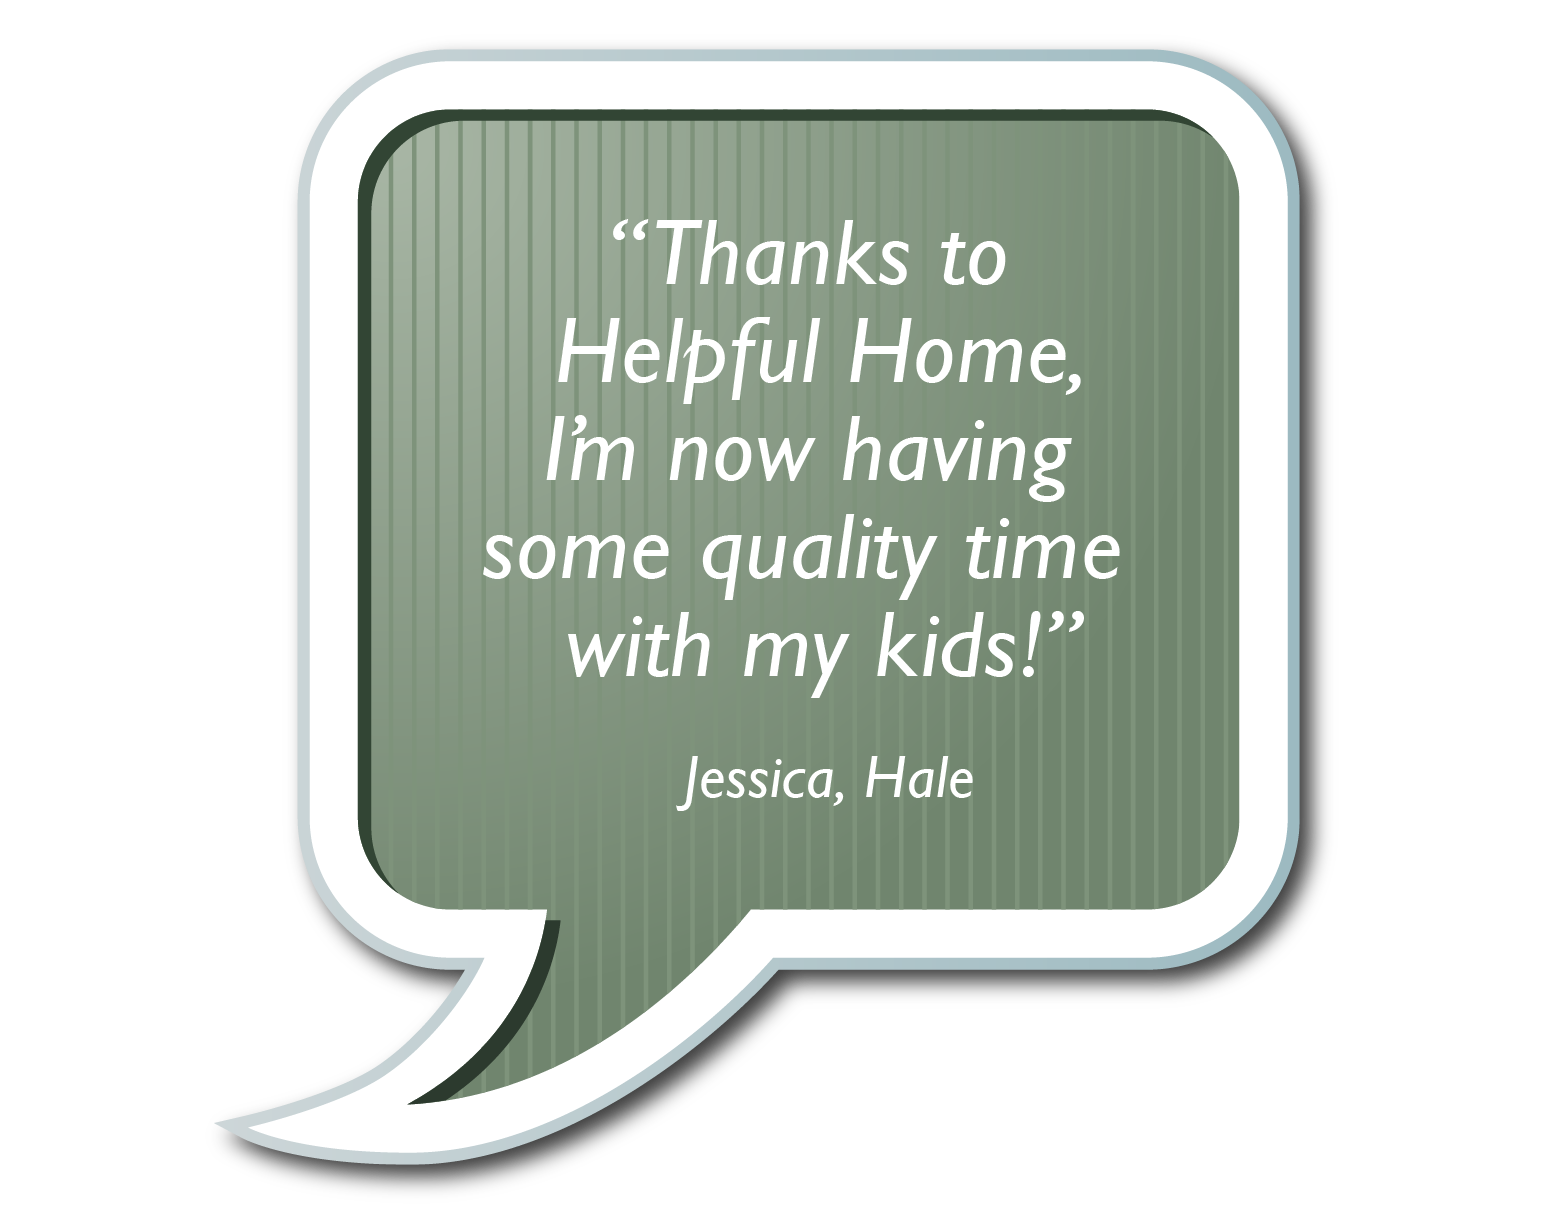 Speach bubble "Thanks to helpful home I'm now having some quality time with my kids!"